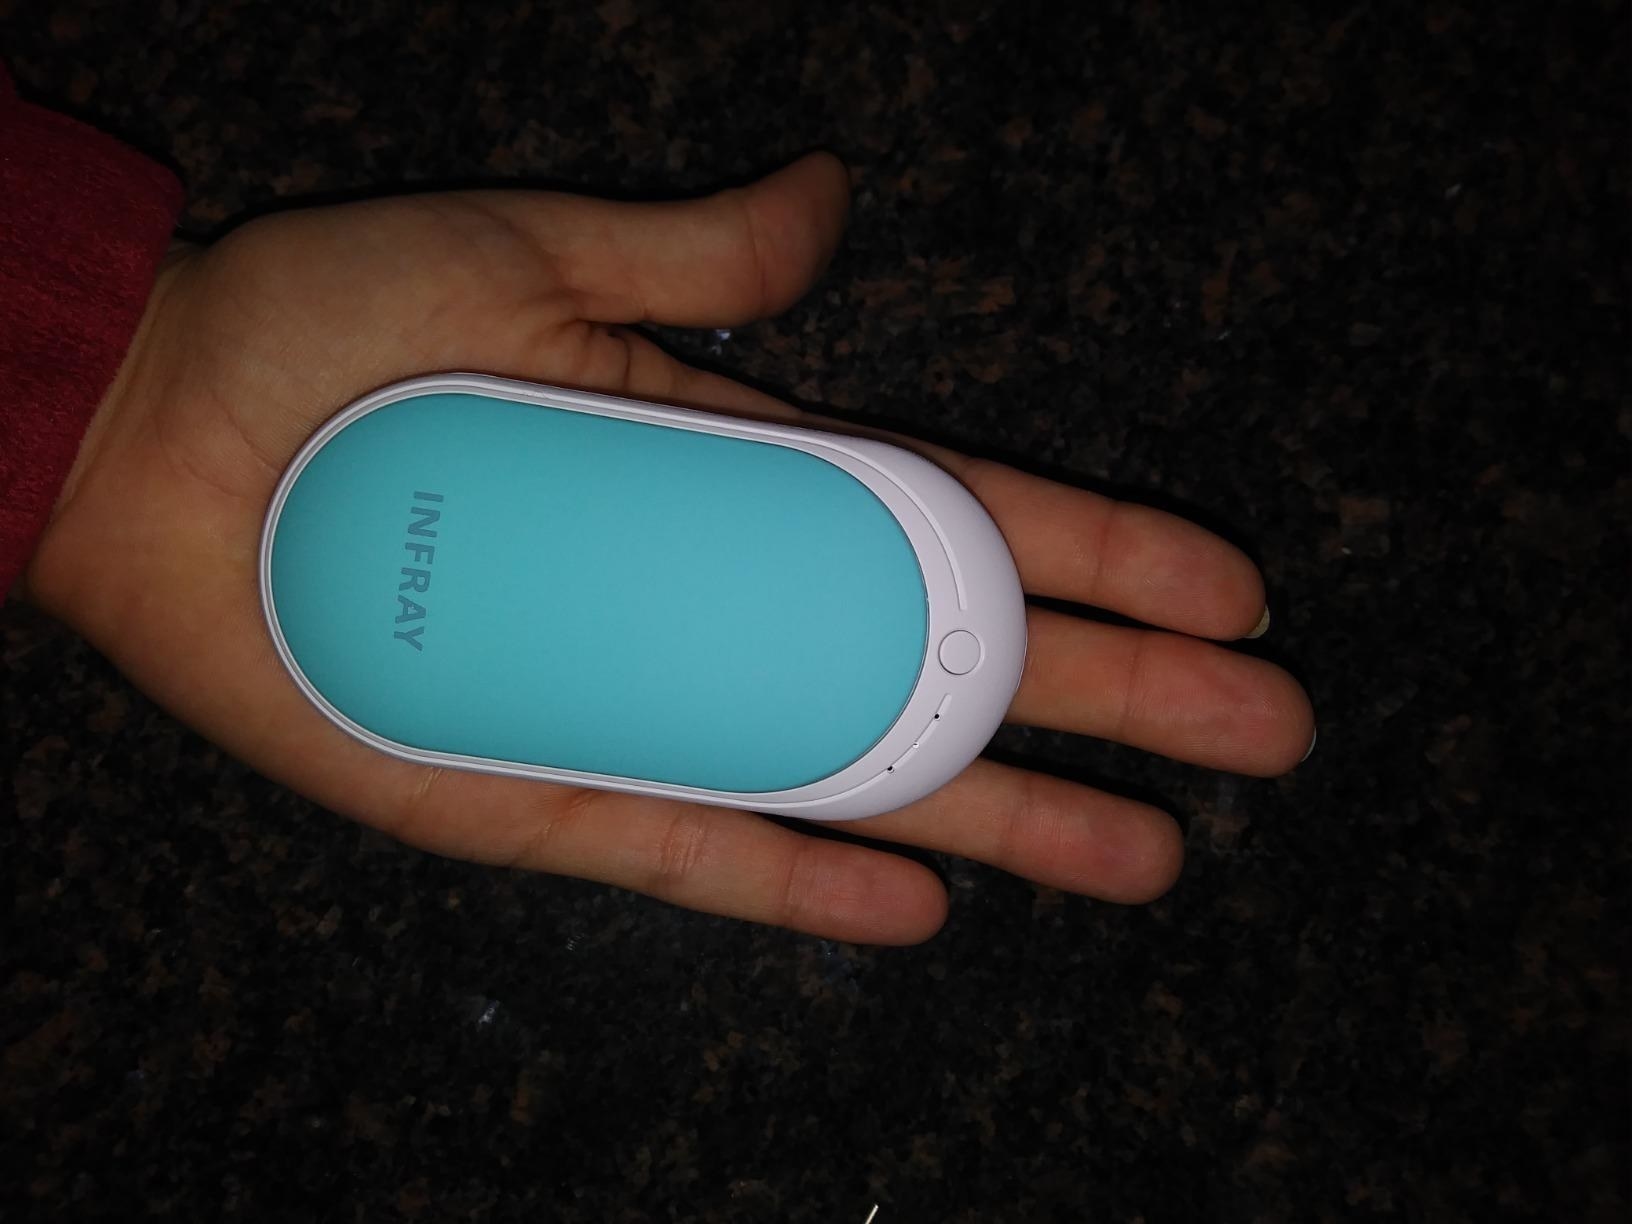 reviewer photo showing the blue hand warmer in a hand